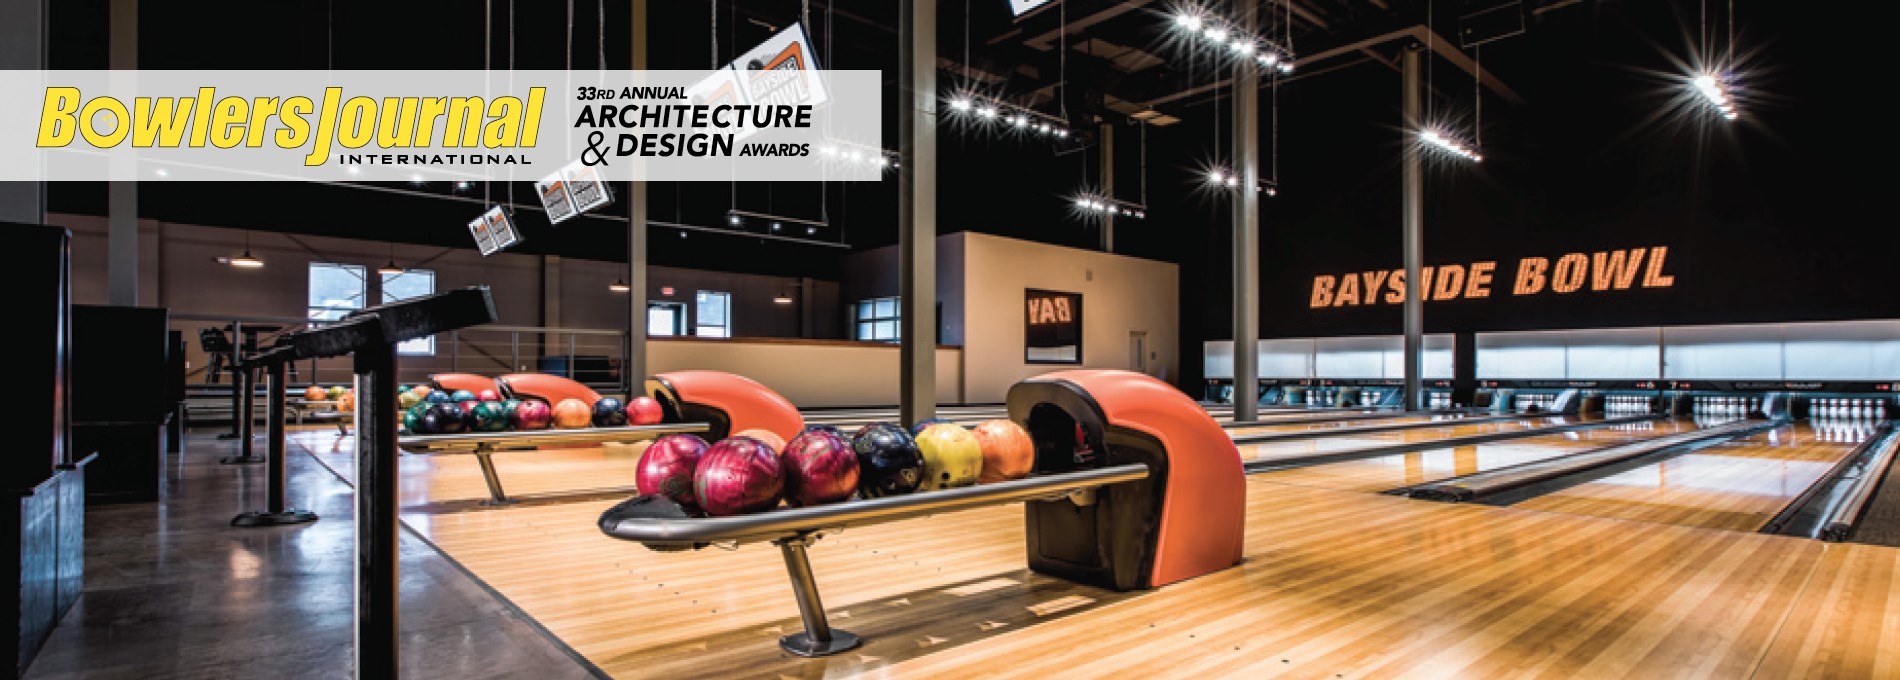 qubicaamf-bowling-33rd-architecture-and-design-awords-banner-Bayside-BOWL